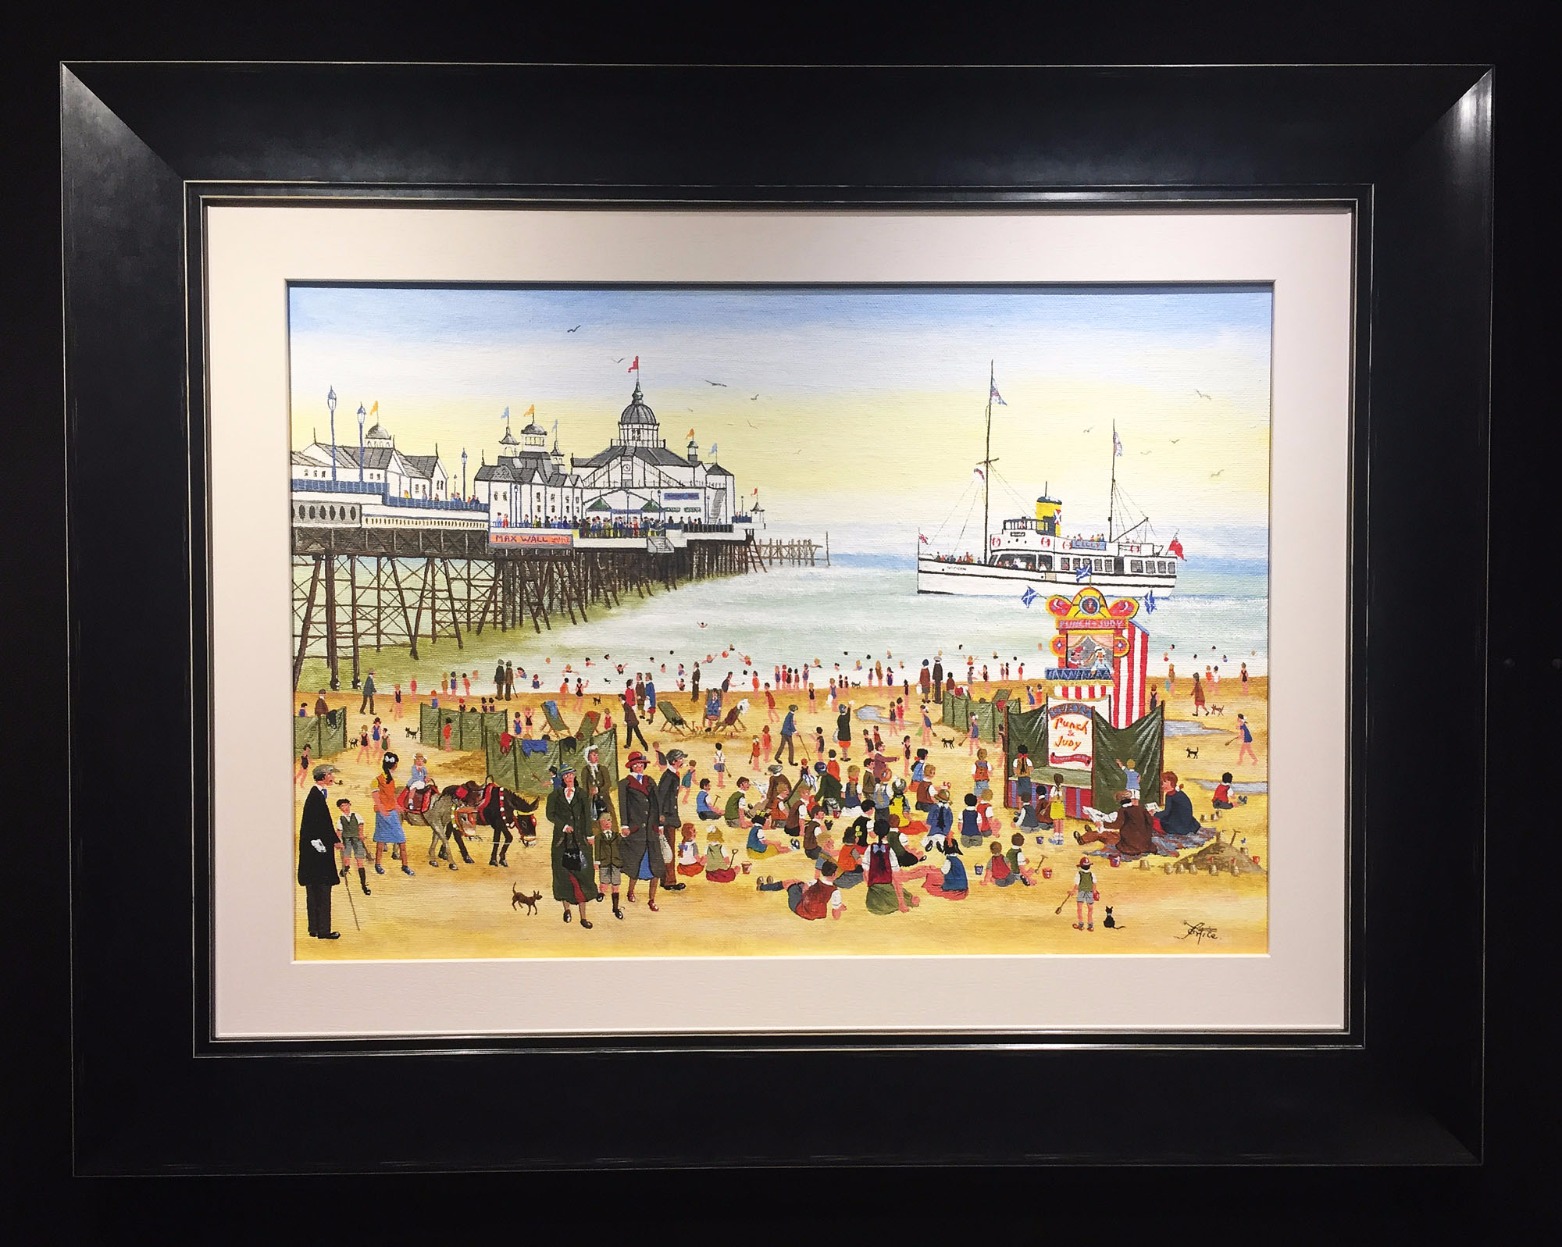 At the Seaside by Allen Tortice, Northern | Nostalgic | Local | Lowry | Sea